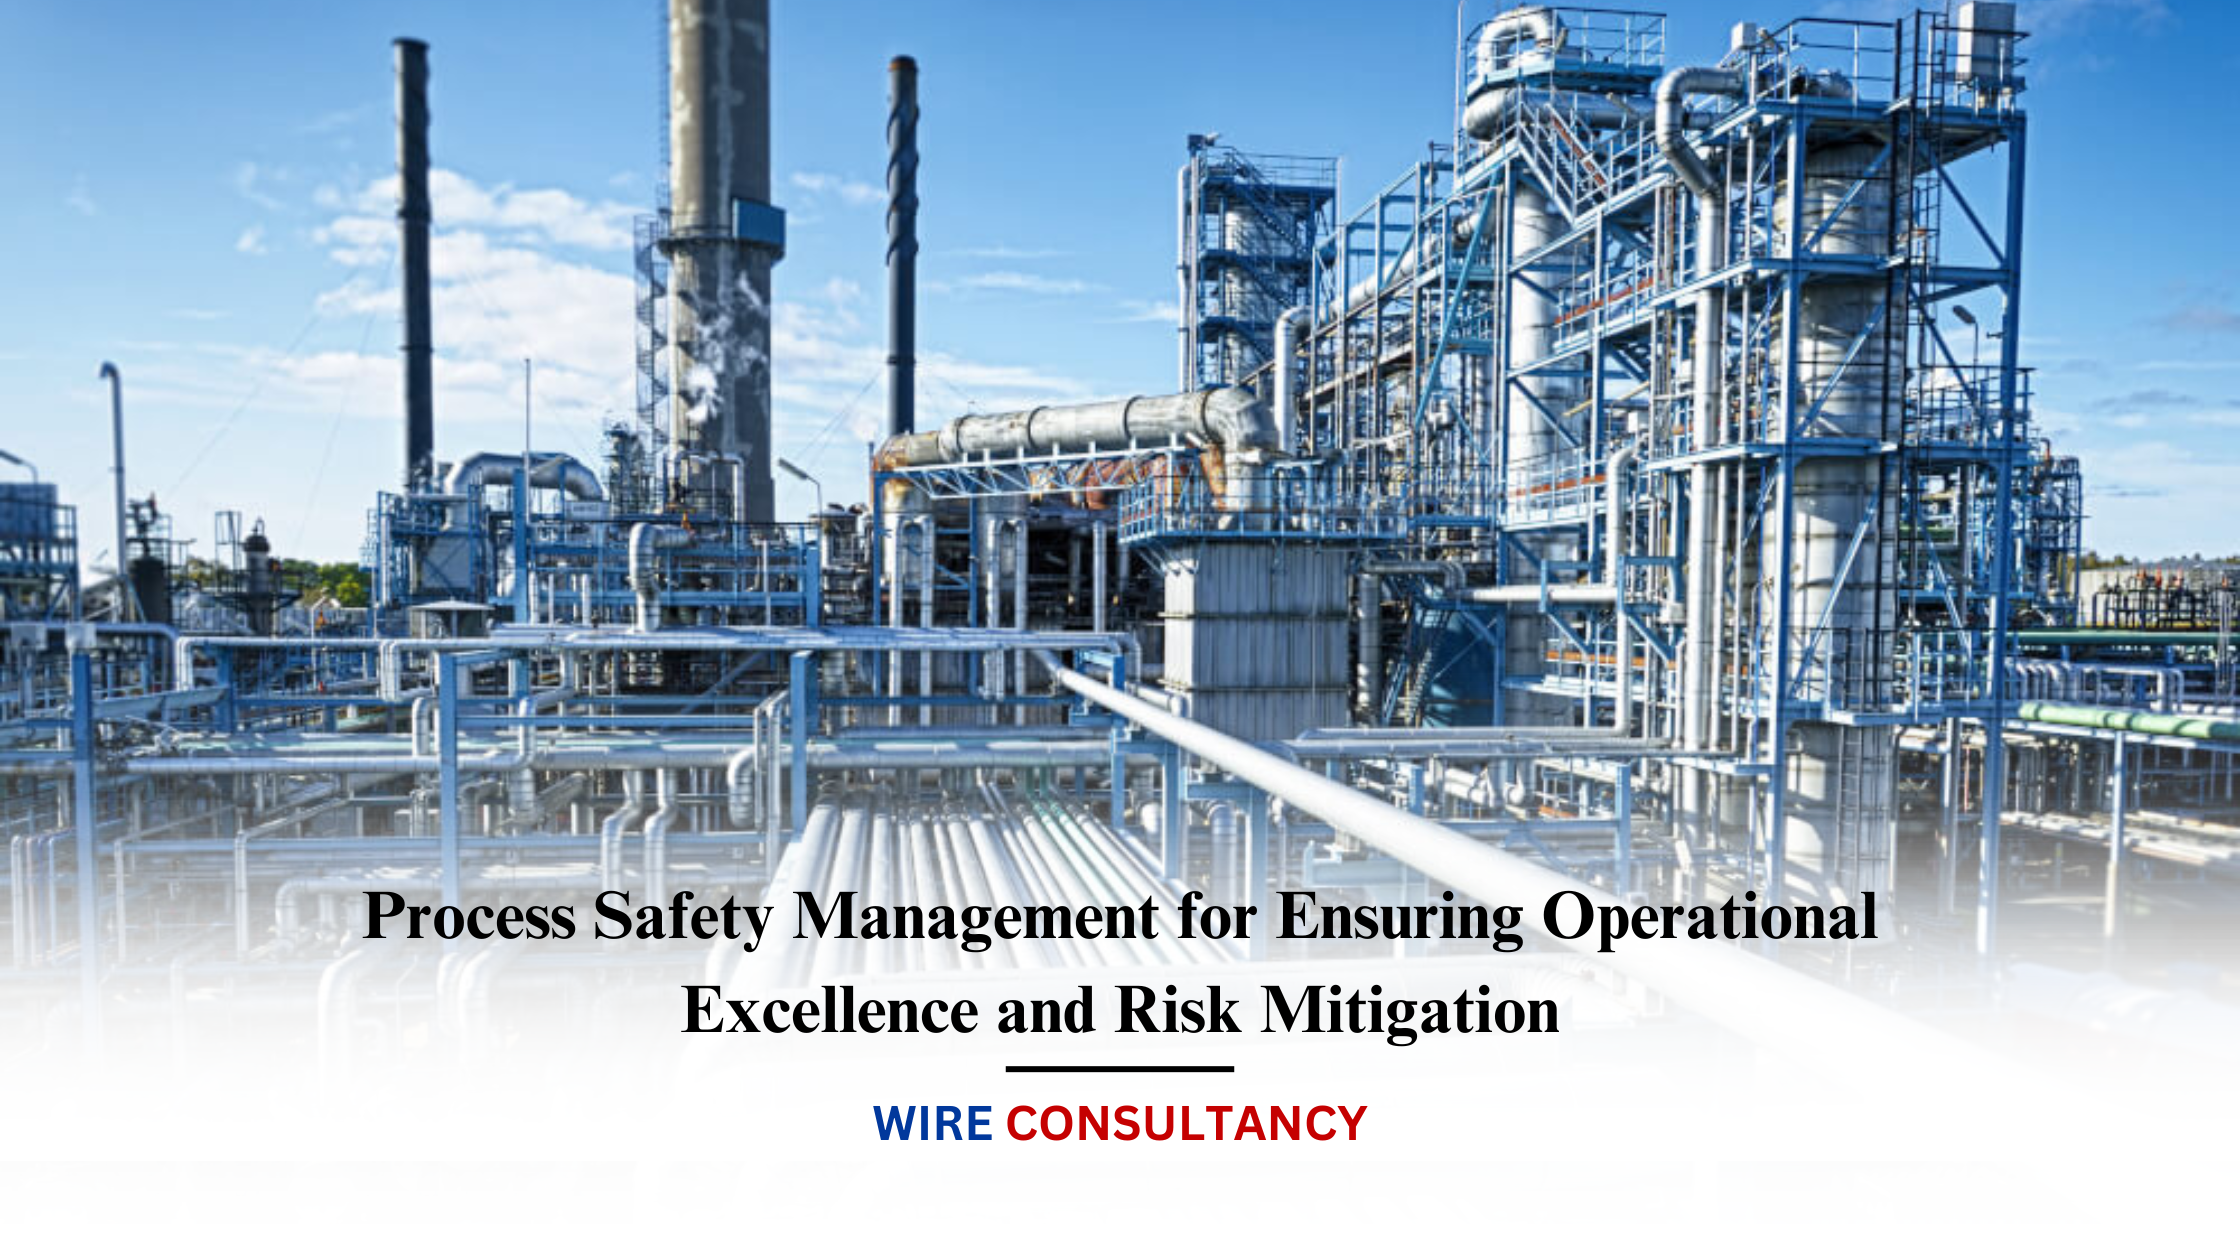 Process Safety Management for Ensuring Operational Excellence and Risk Mitigation